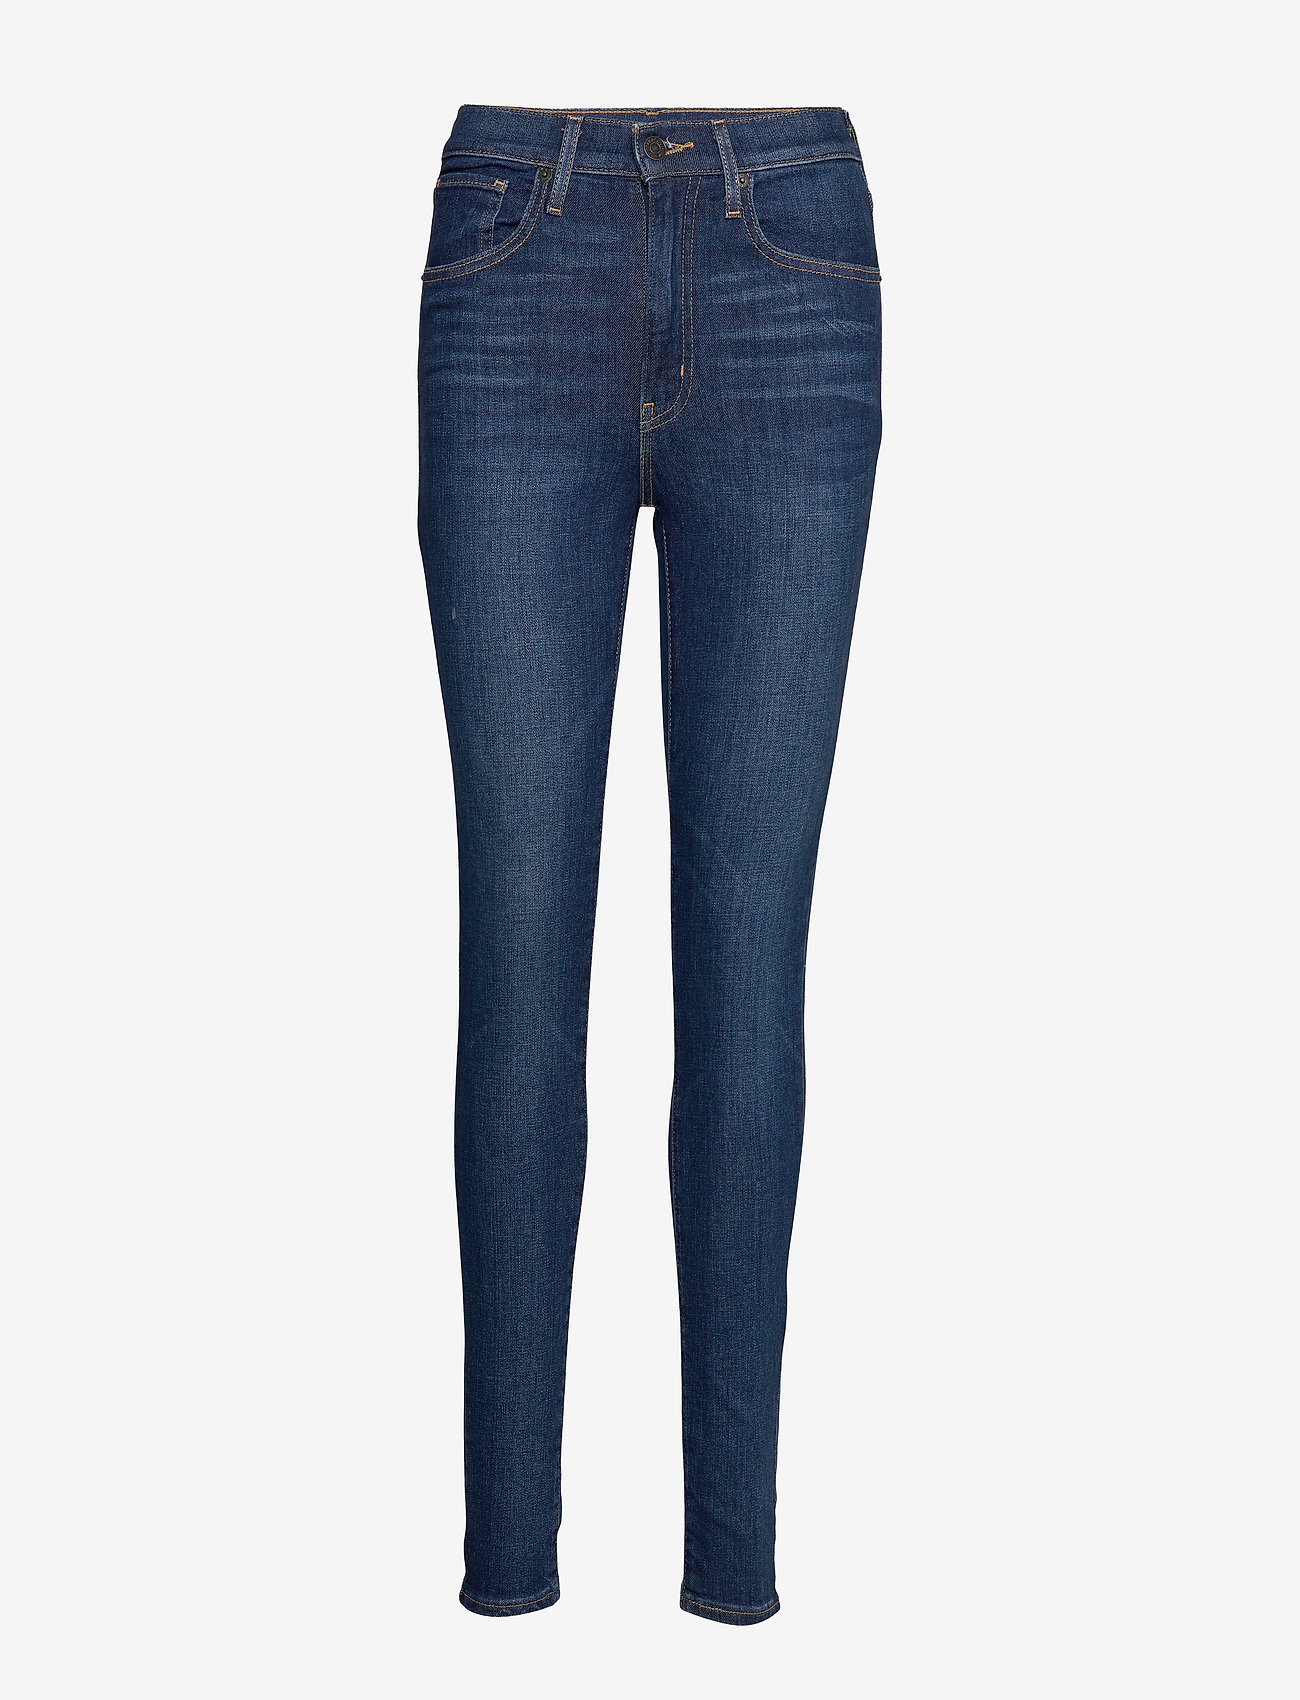 m and s super skinny jeans